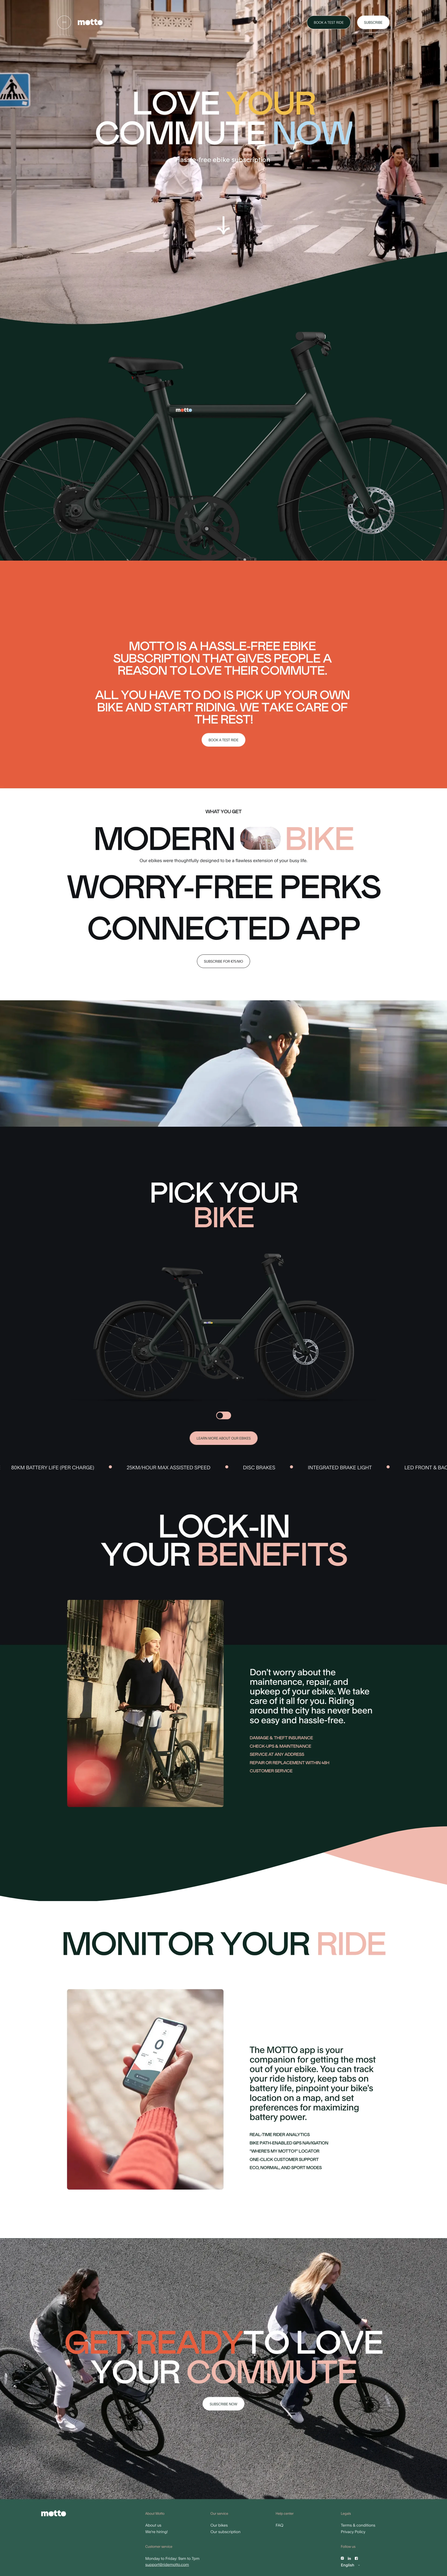 Motto Landing Page Example: MOTTO is a hassle-free ebike subscription that gives people a reason to love their commute. All you have to do is pick up your own bike and start riding. We take care of the rest!